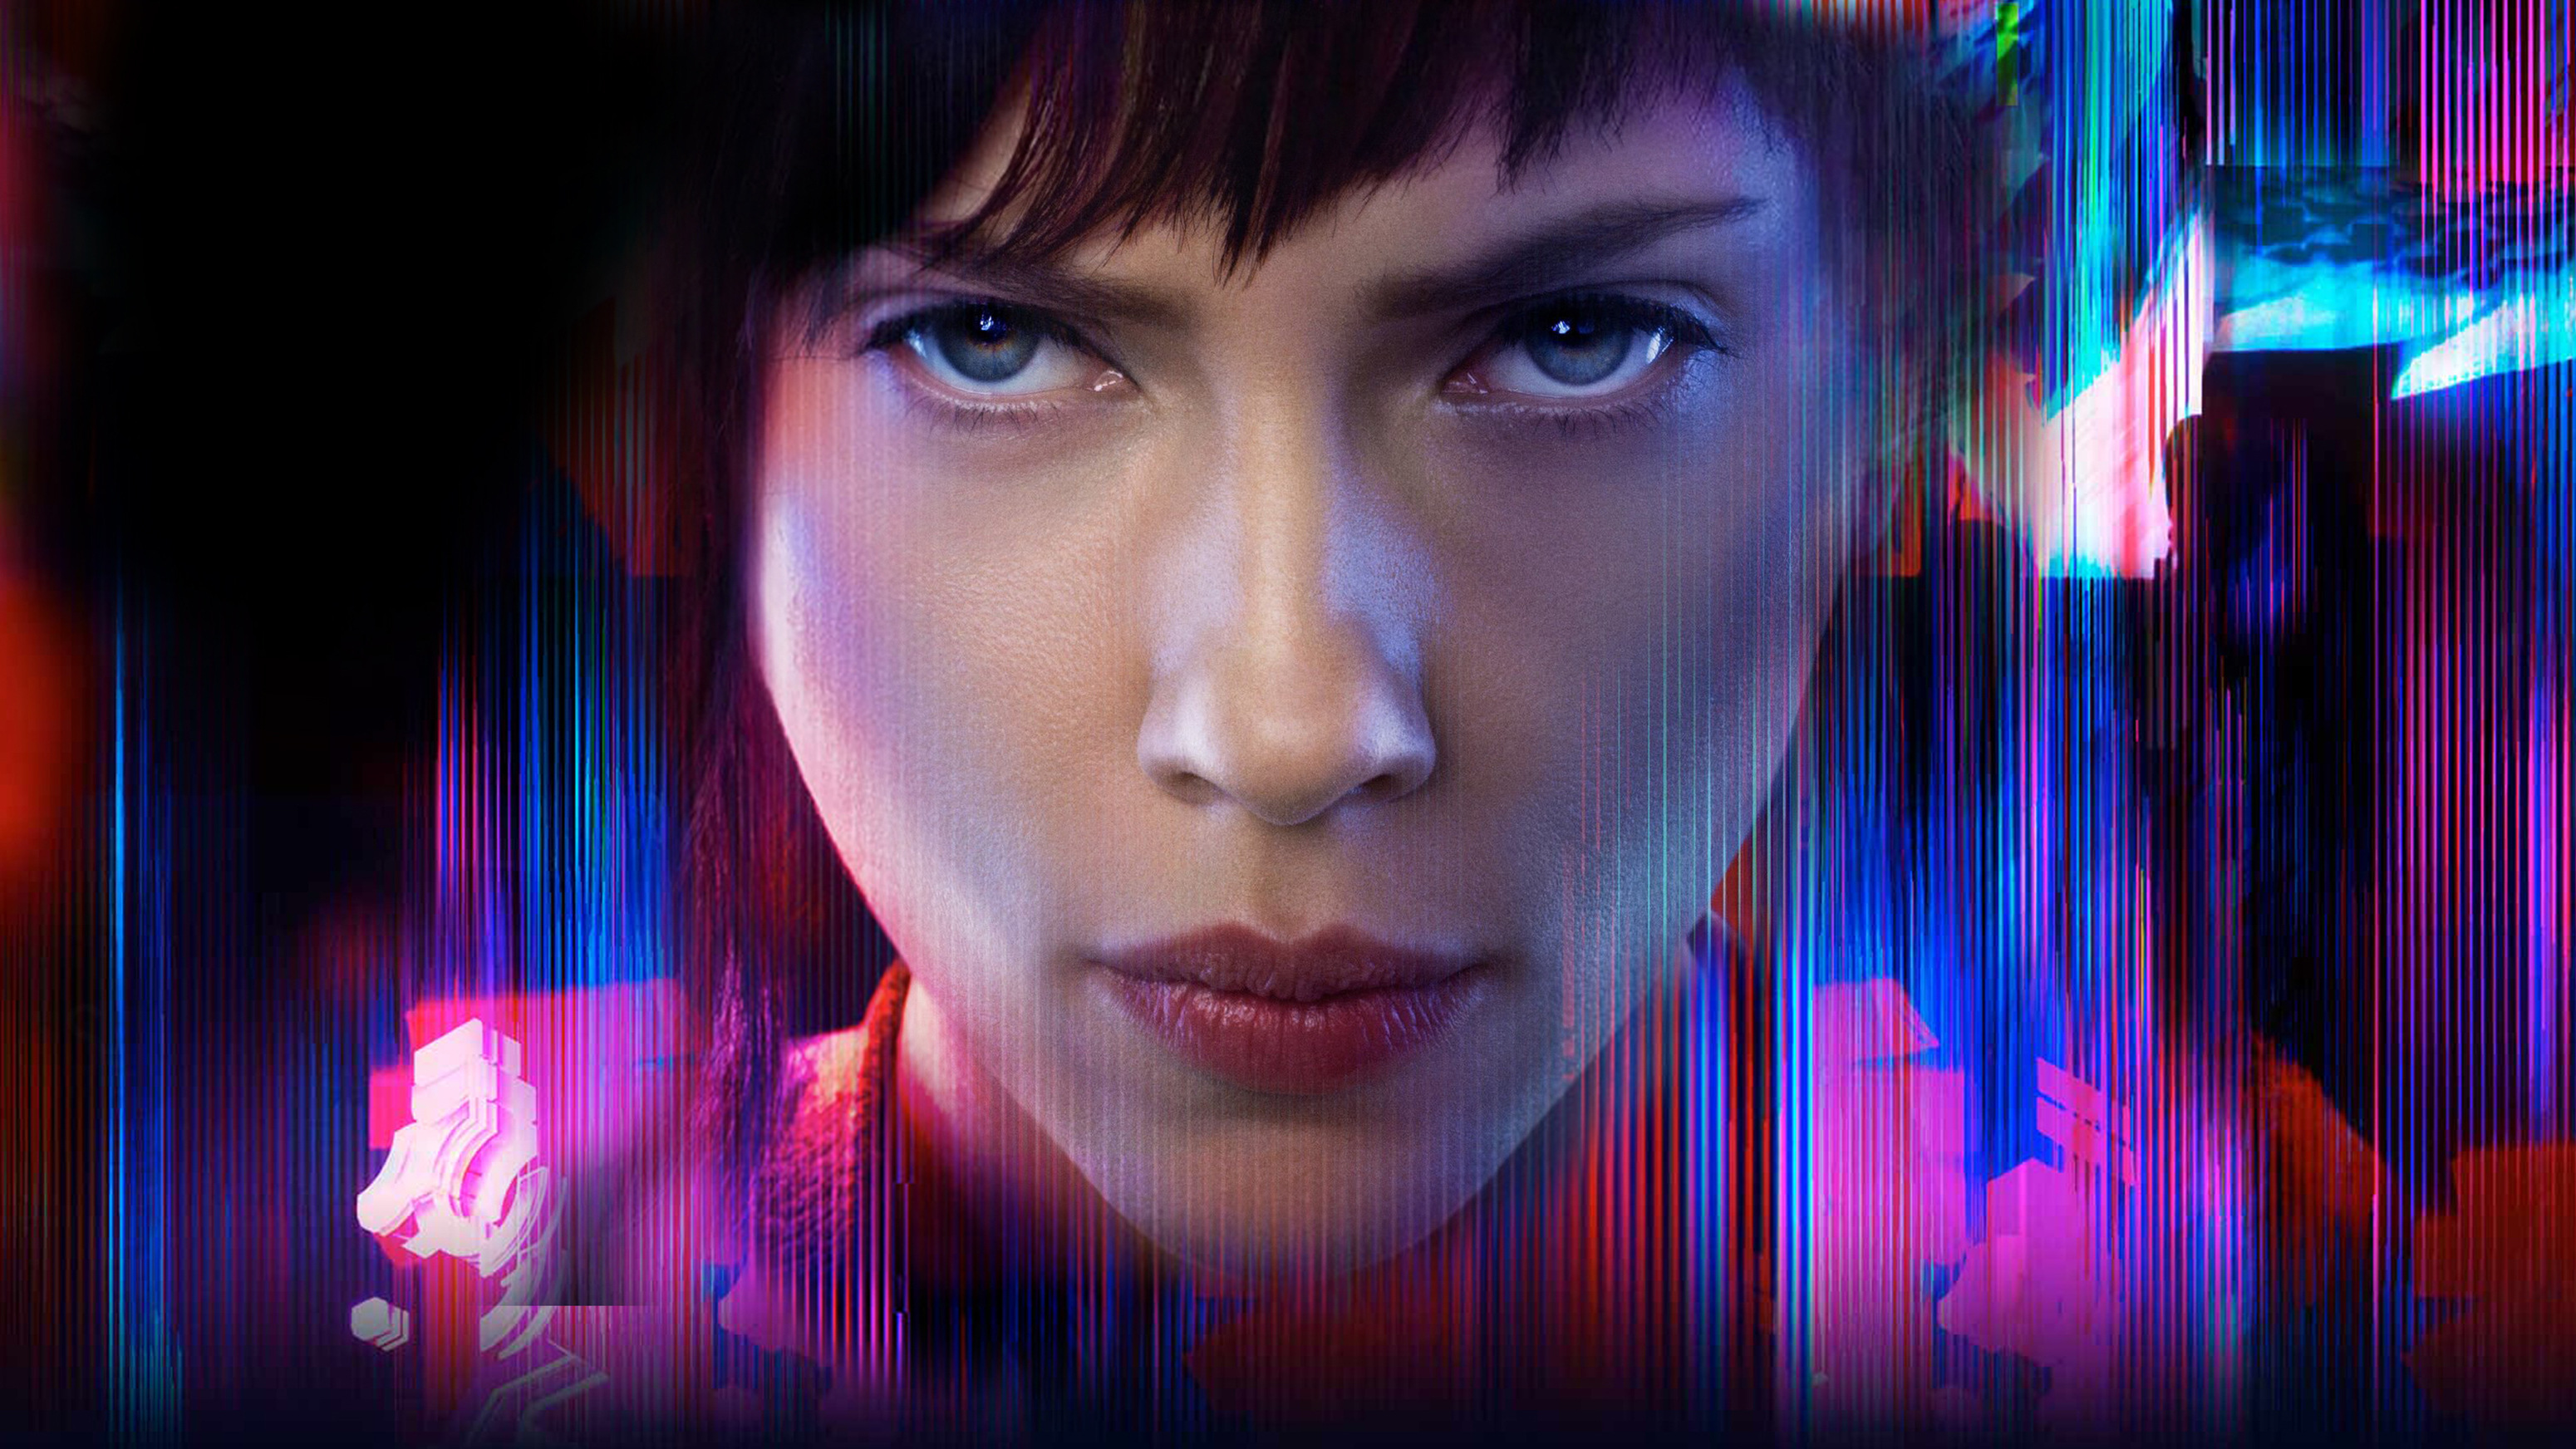 Ghost in the Shell (2017) Picture